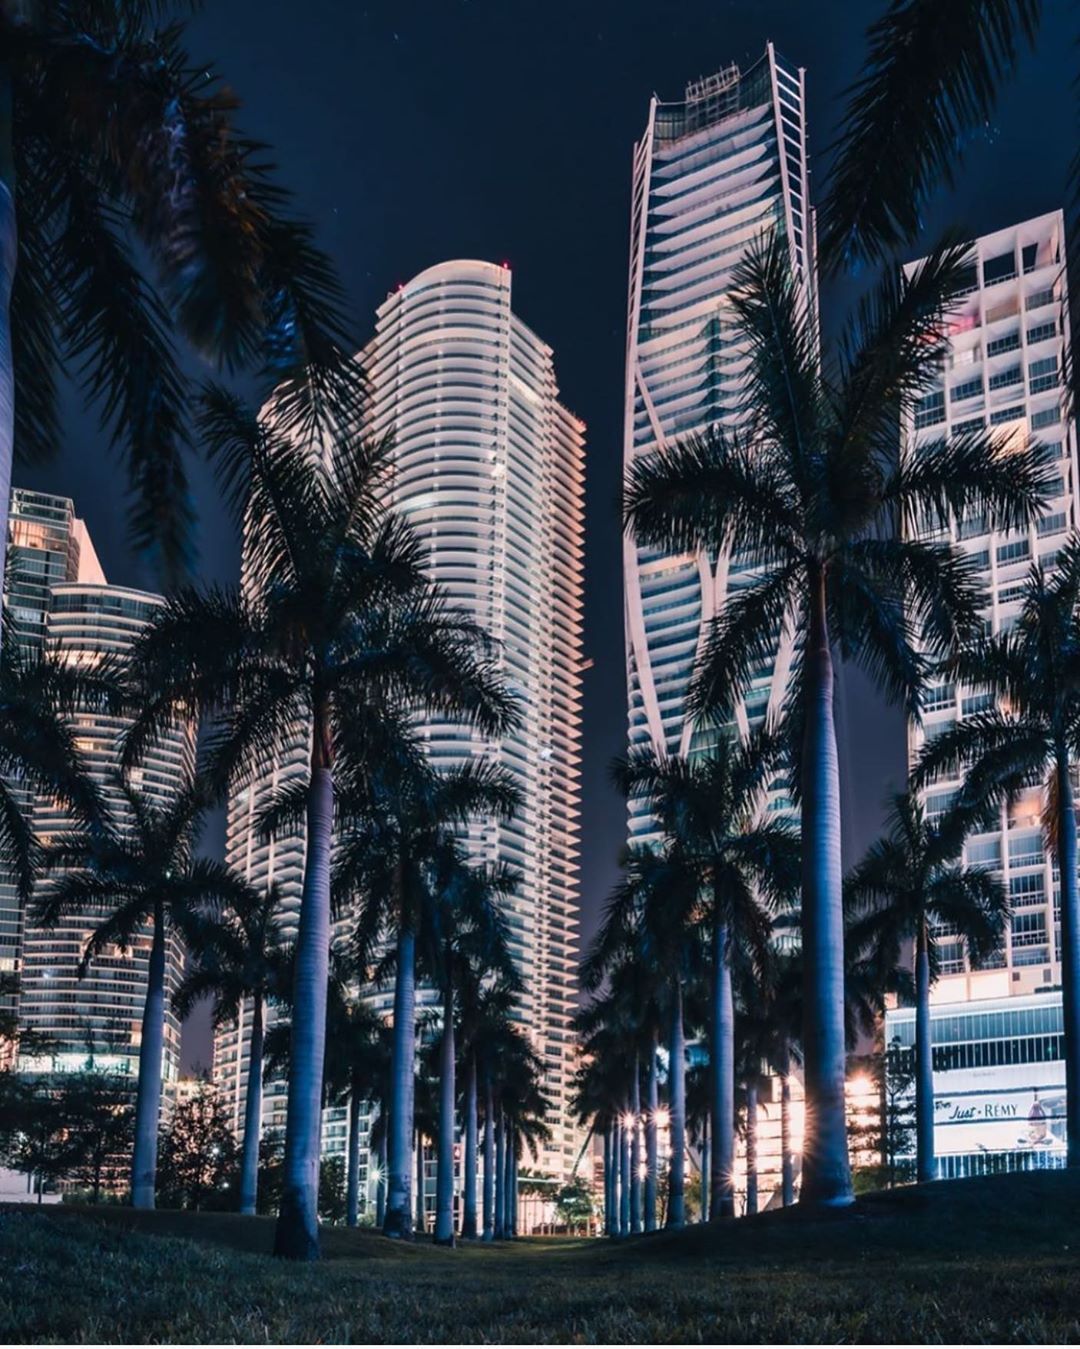 Miami. Official Page on Instagram: “Goodnight #Miami